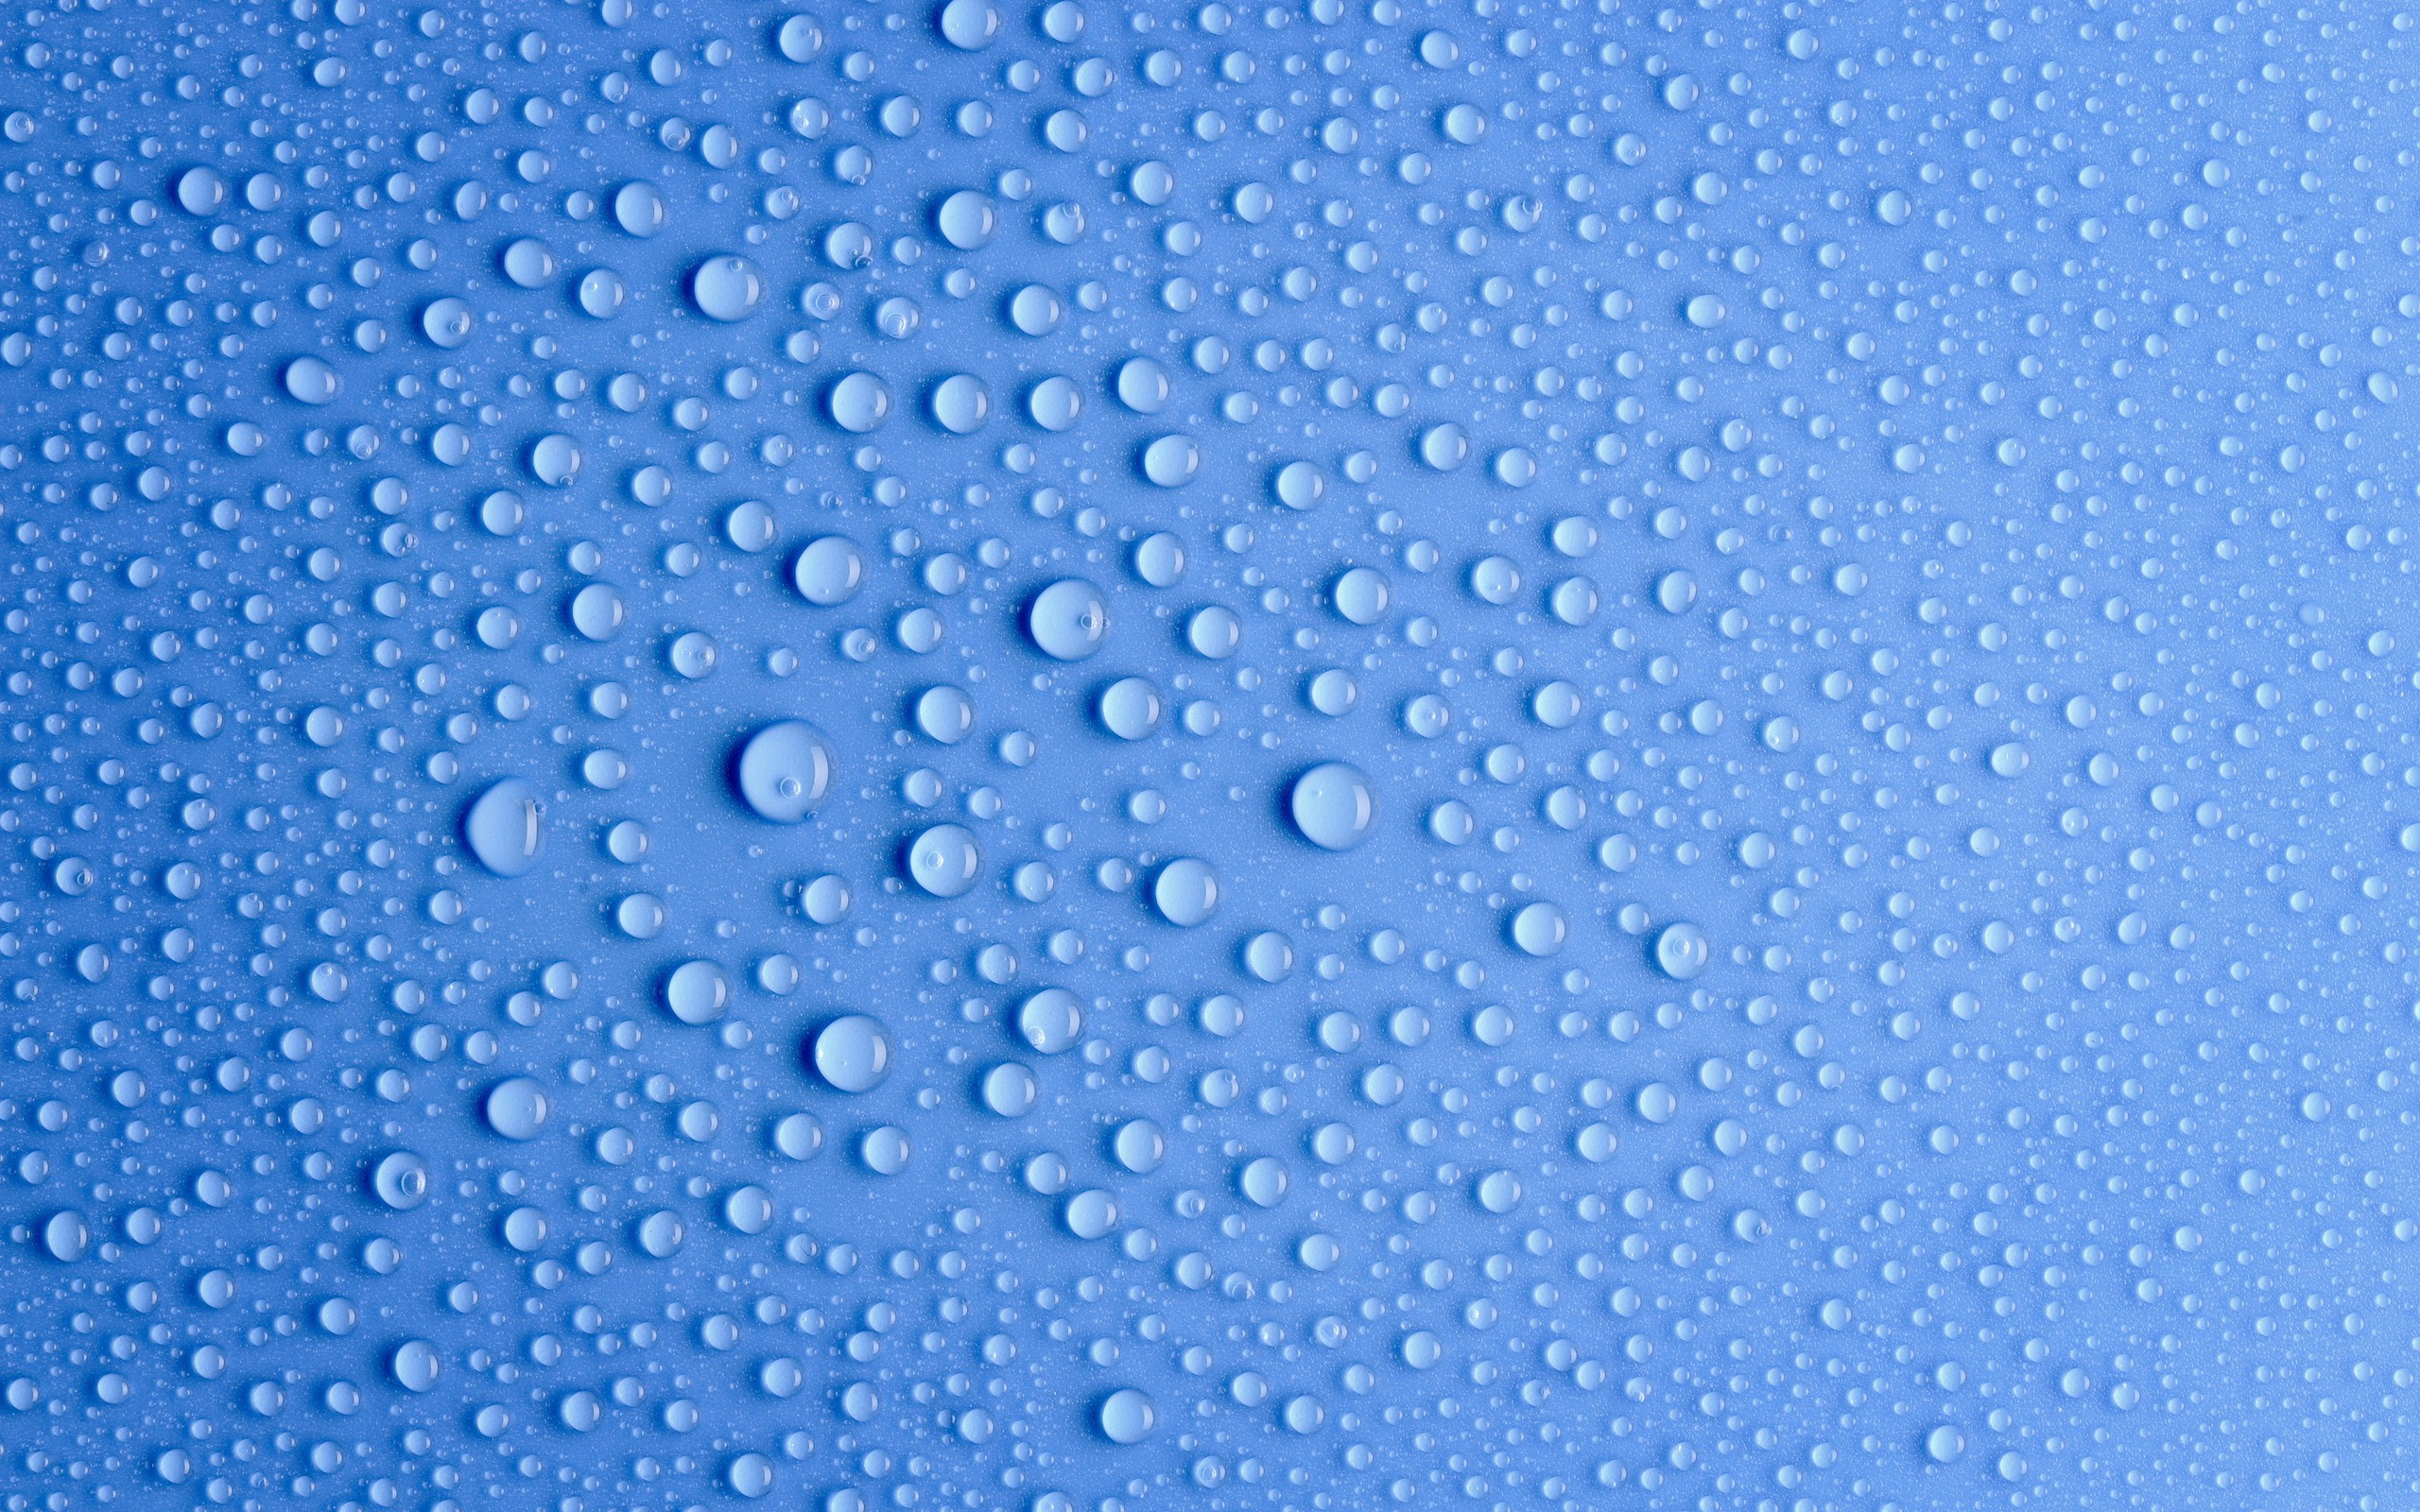 Background Blue Water Droplets Wallpaper (62+ images)